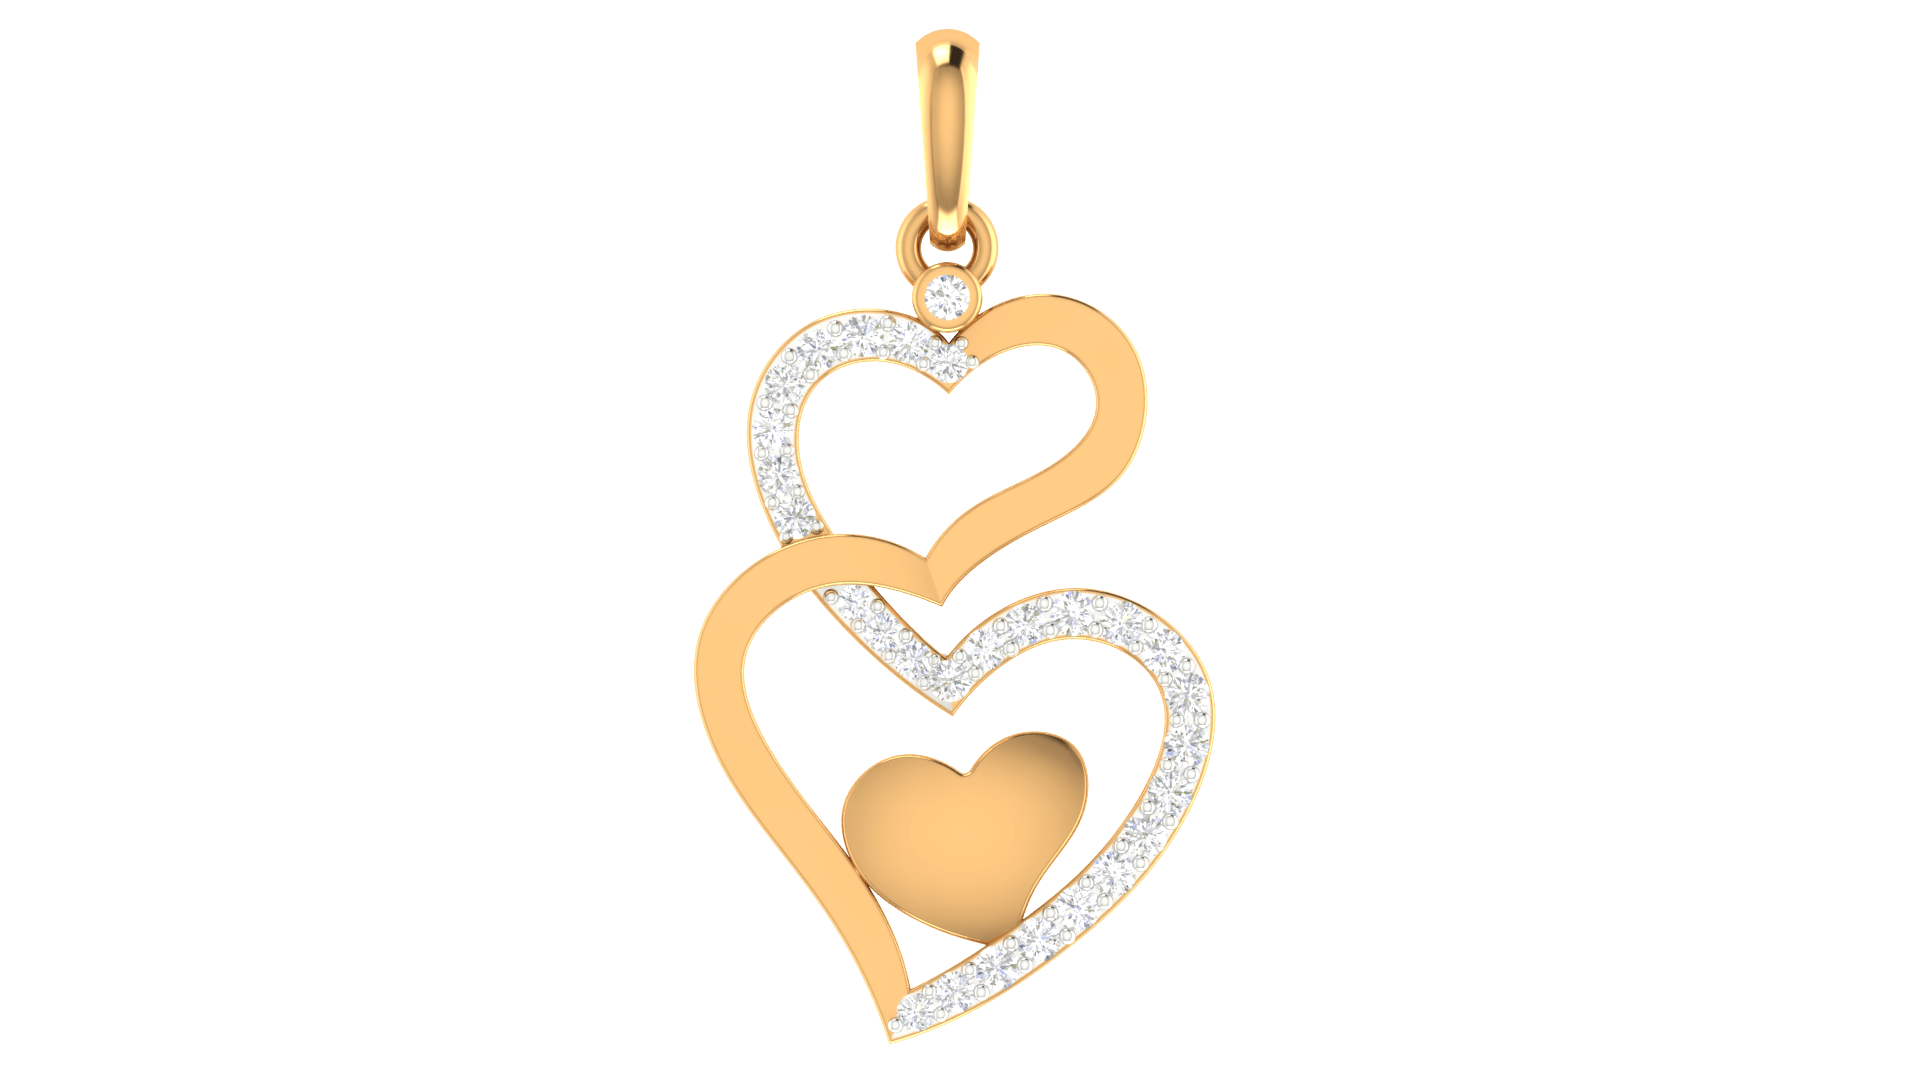 Auory 925 Sterling Silver Heart Pendant AUPH-18 - Auory